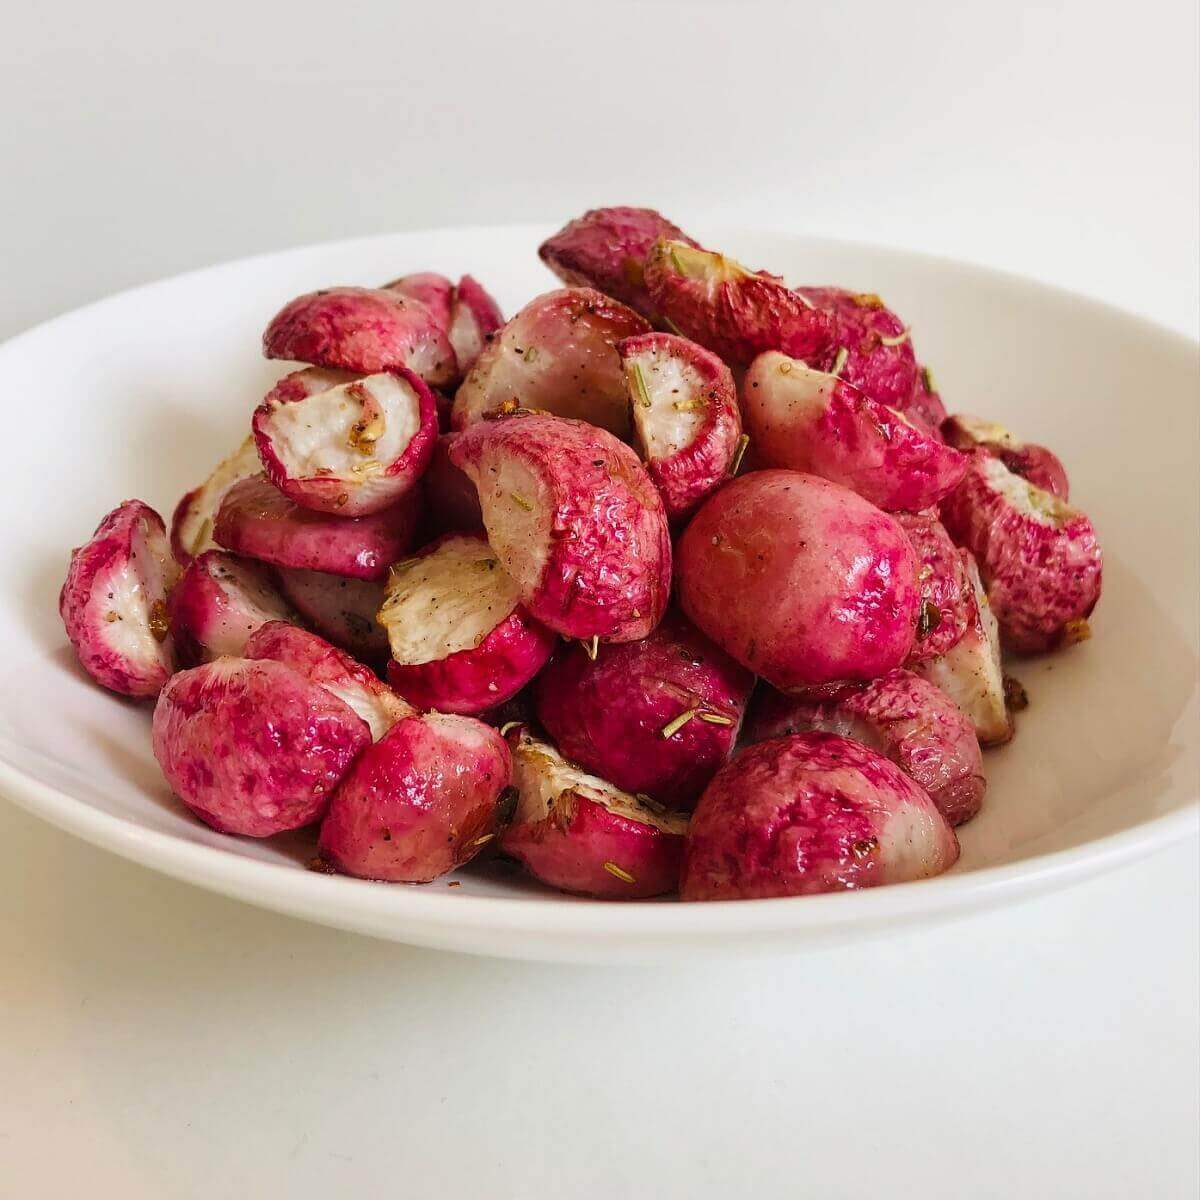 Roasted radishes in a white bowl.